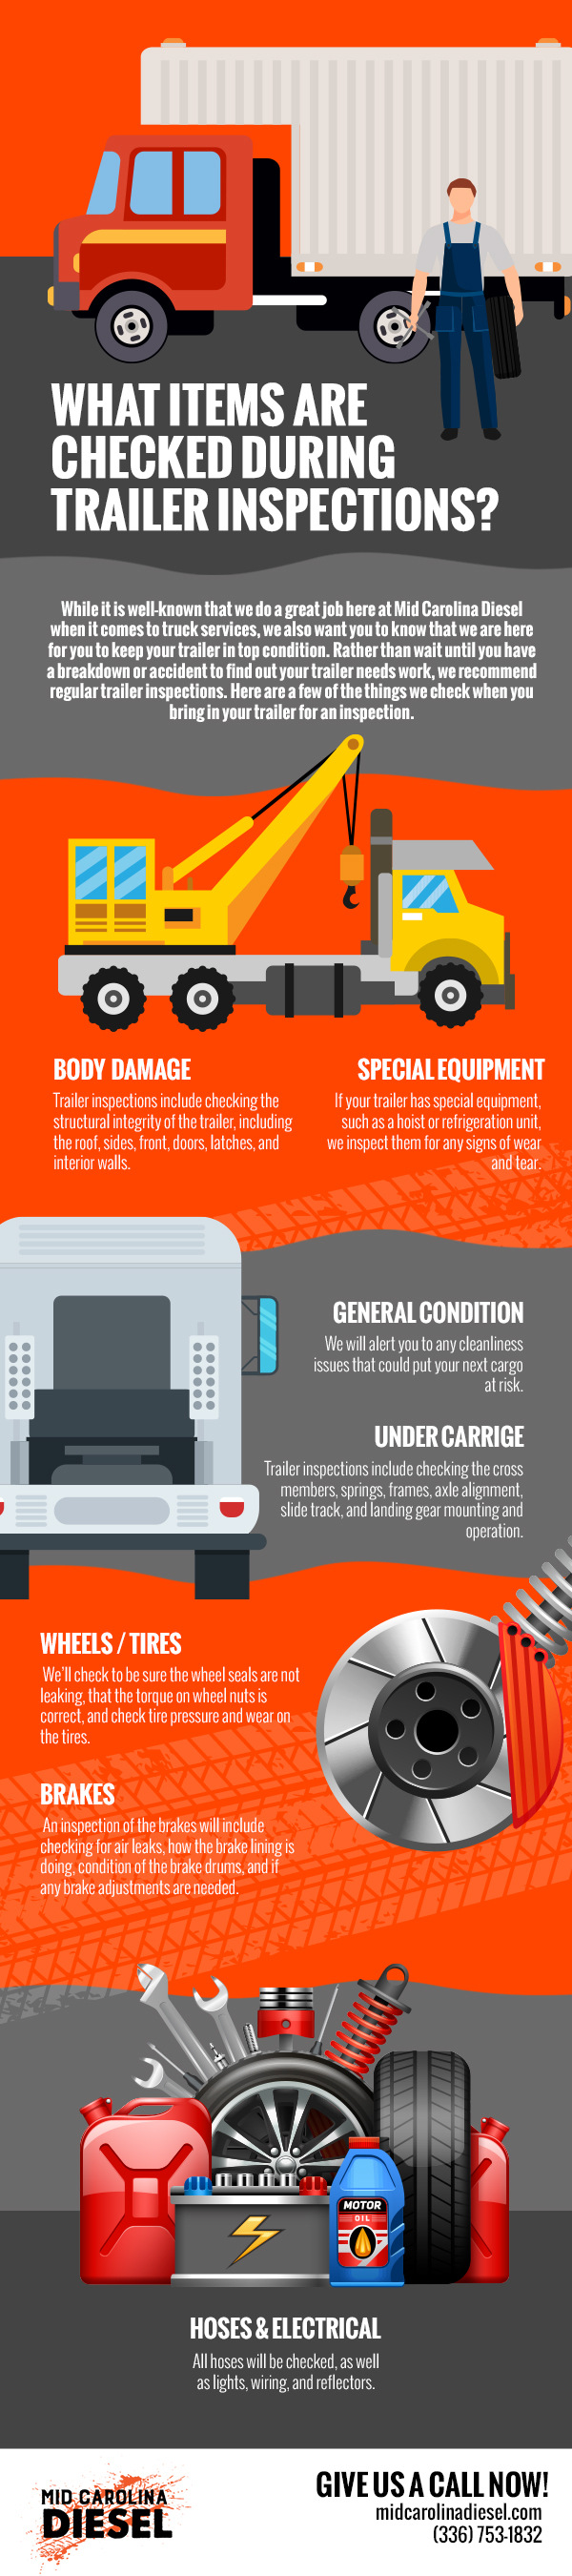 What Items are Checked During Trailer Inspections? [infographic]